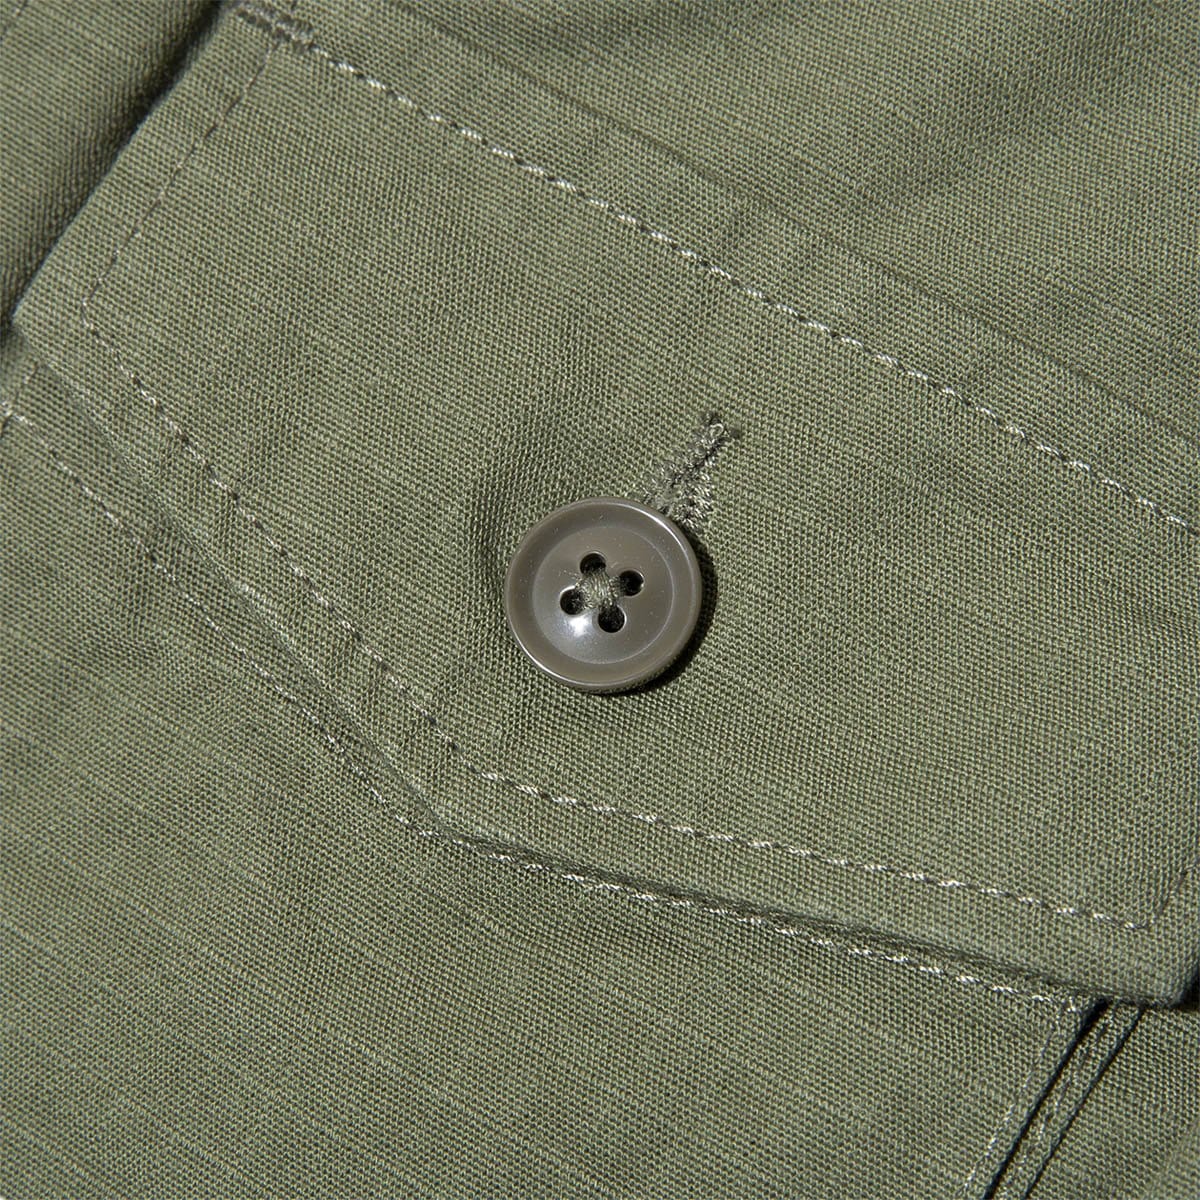 Engineered Garments FA Pant Olive Cotton Ripstop